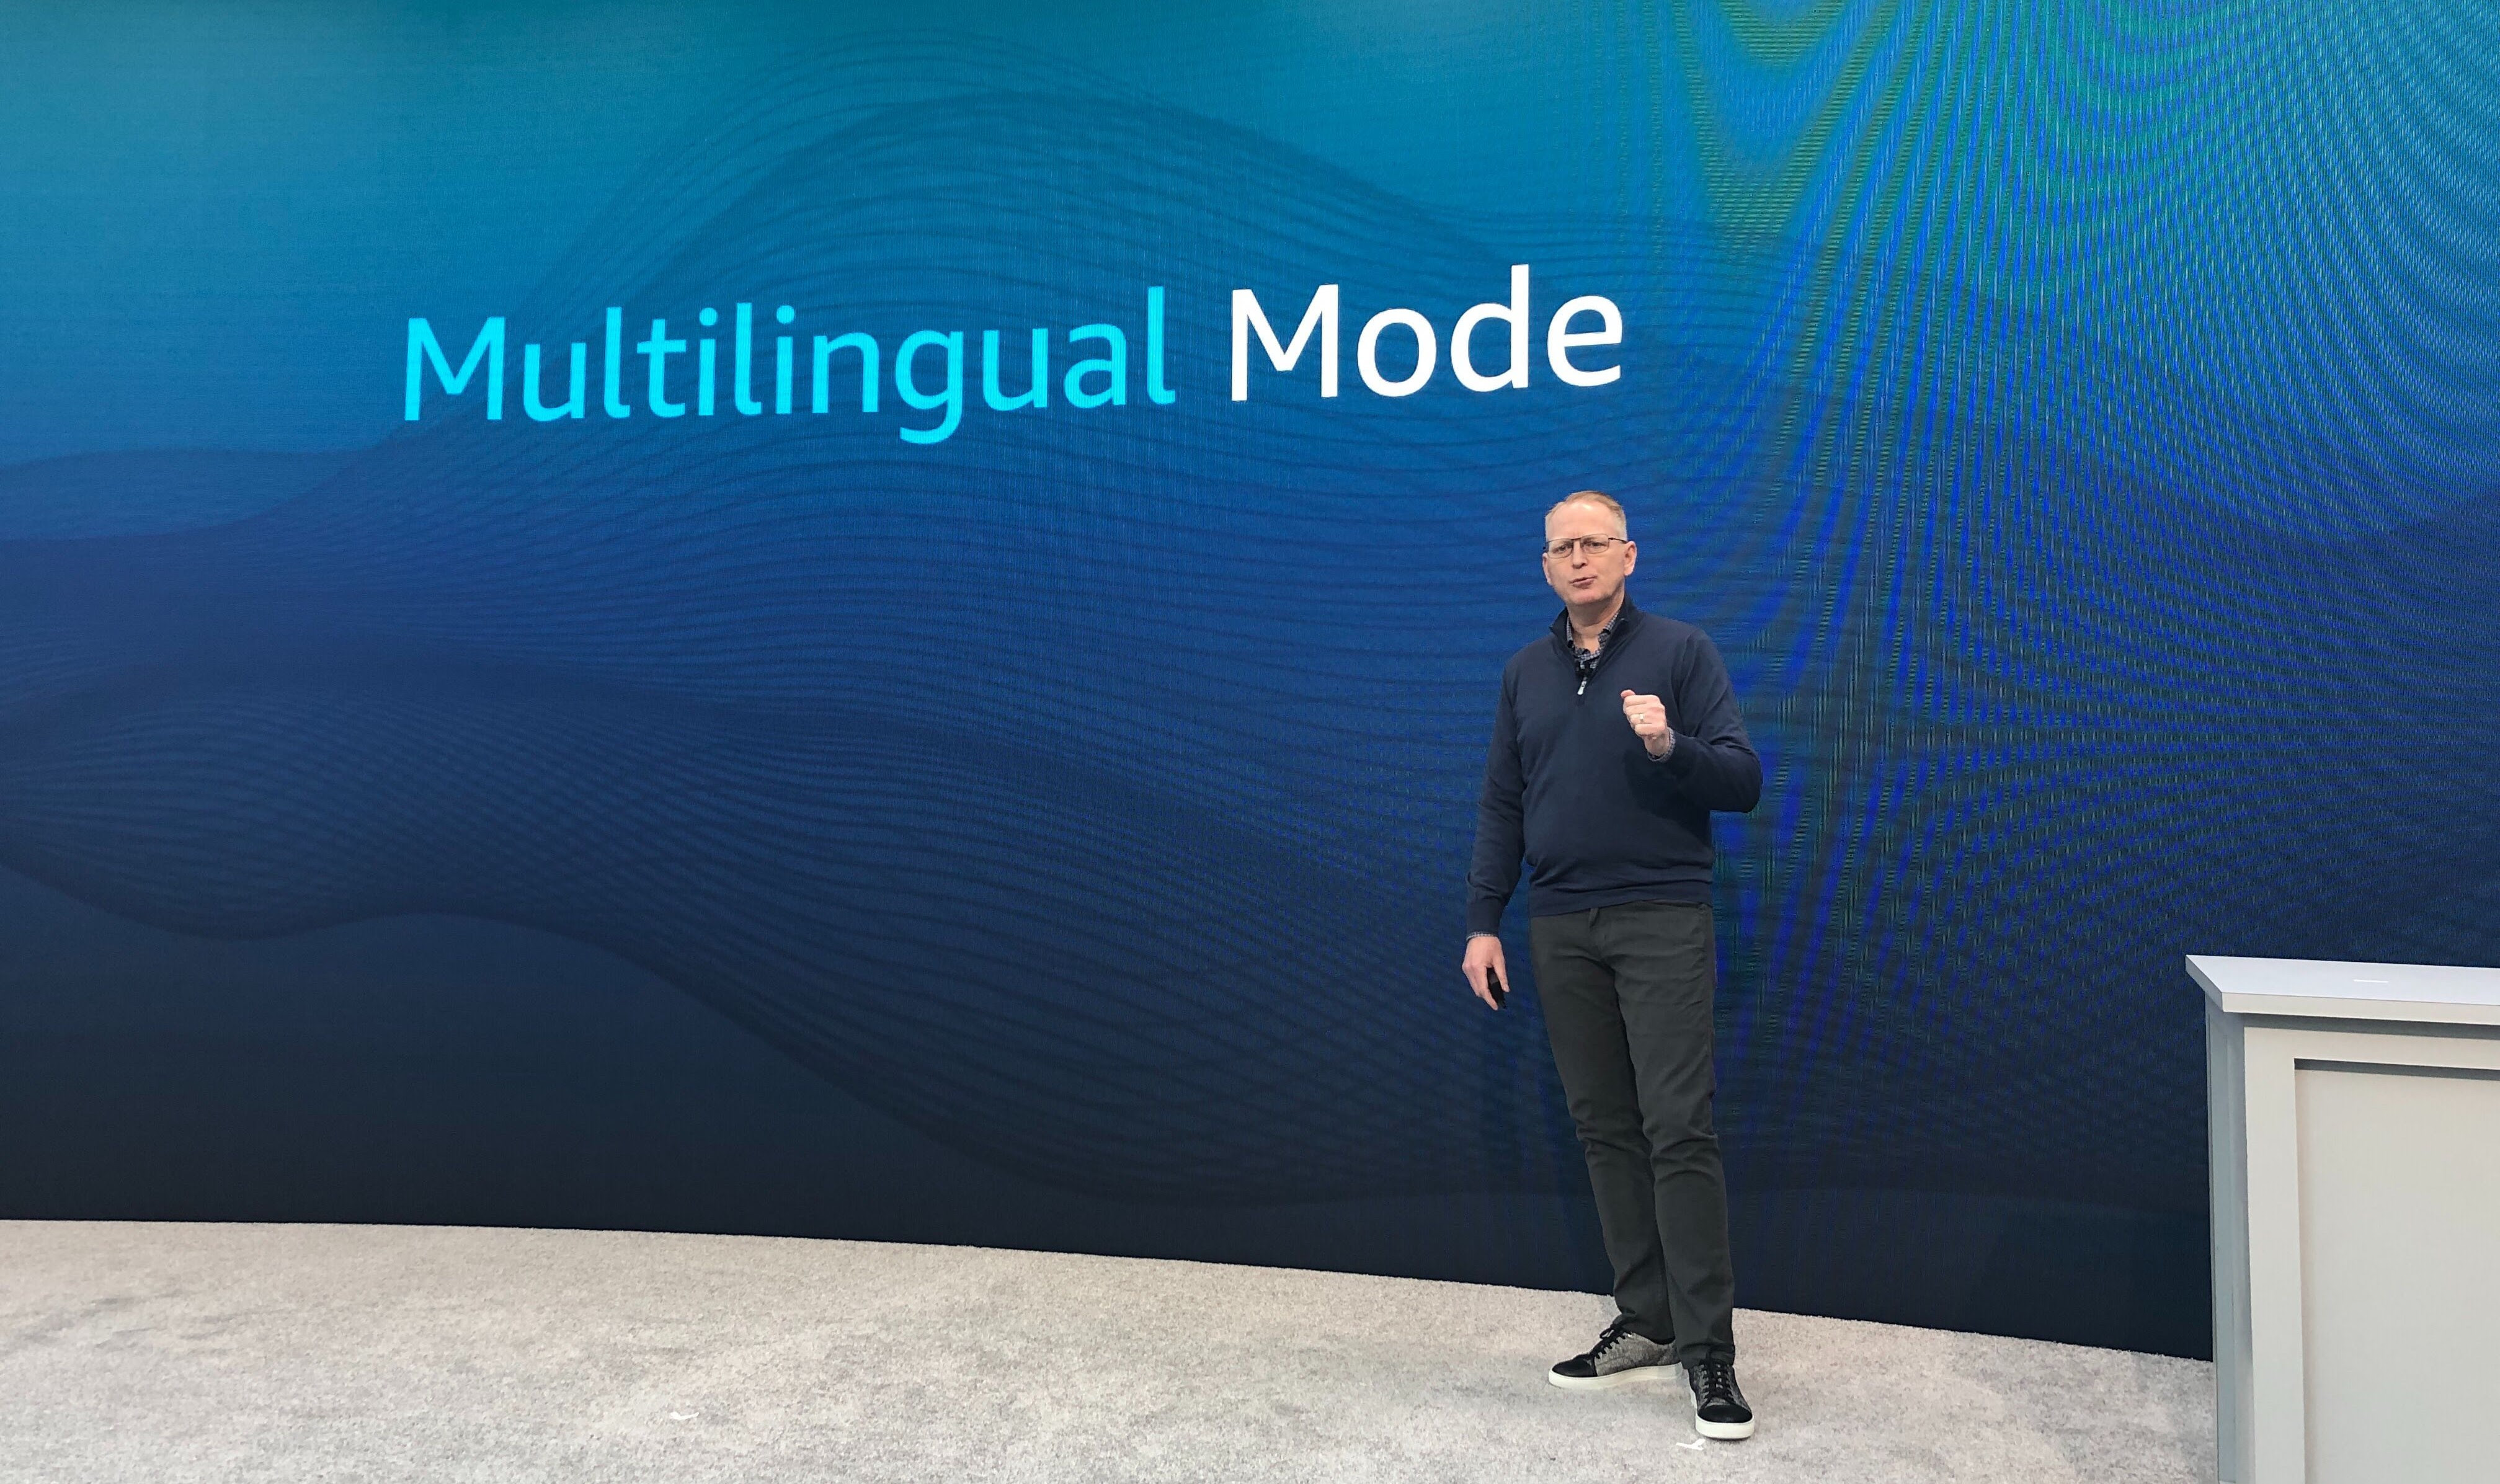 Amazon SVP of Devices Dave Limp announcing Alexa Multilingual Mode